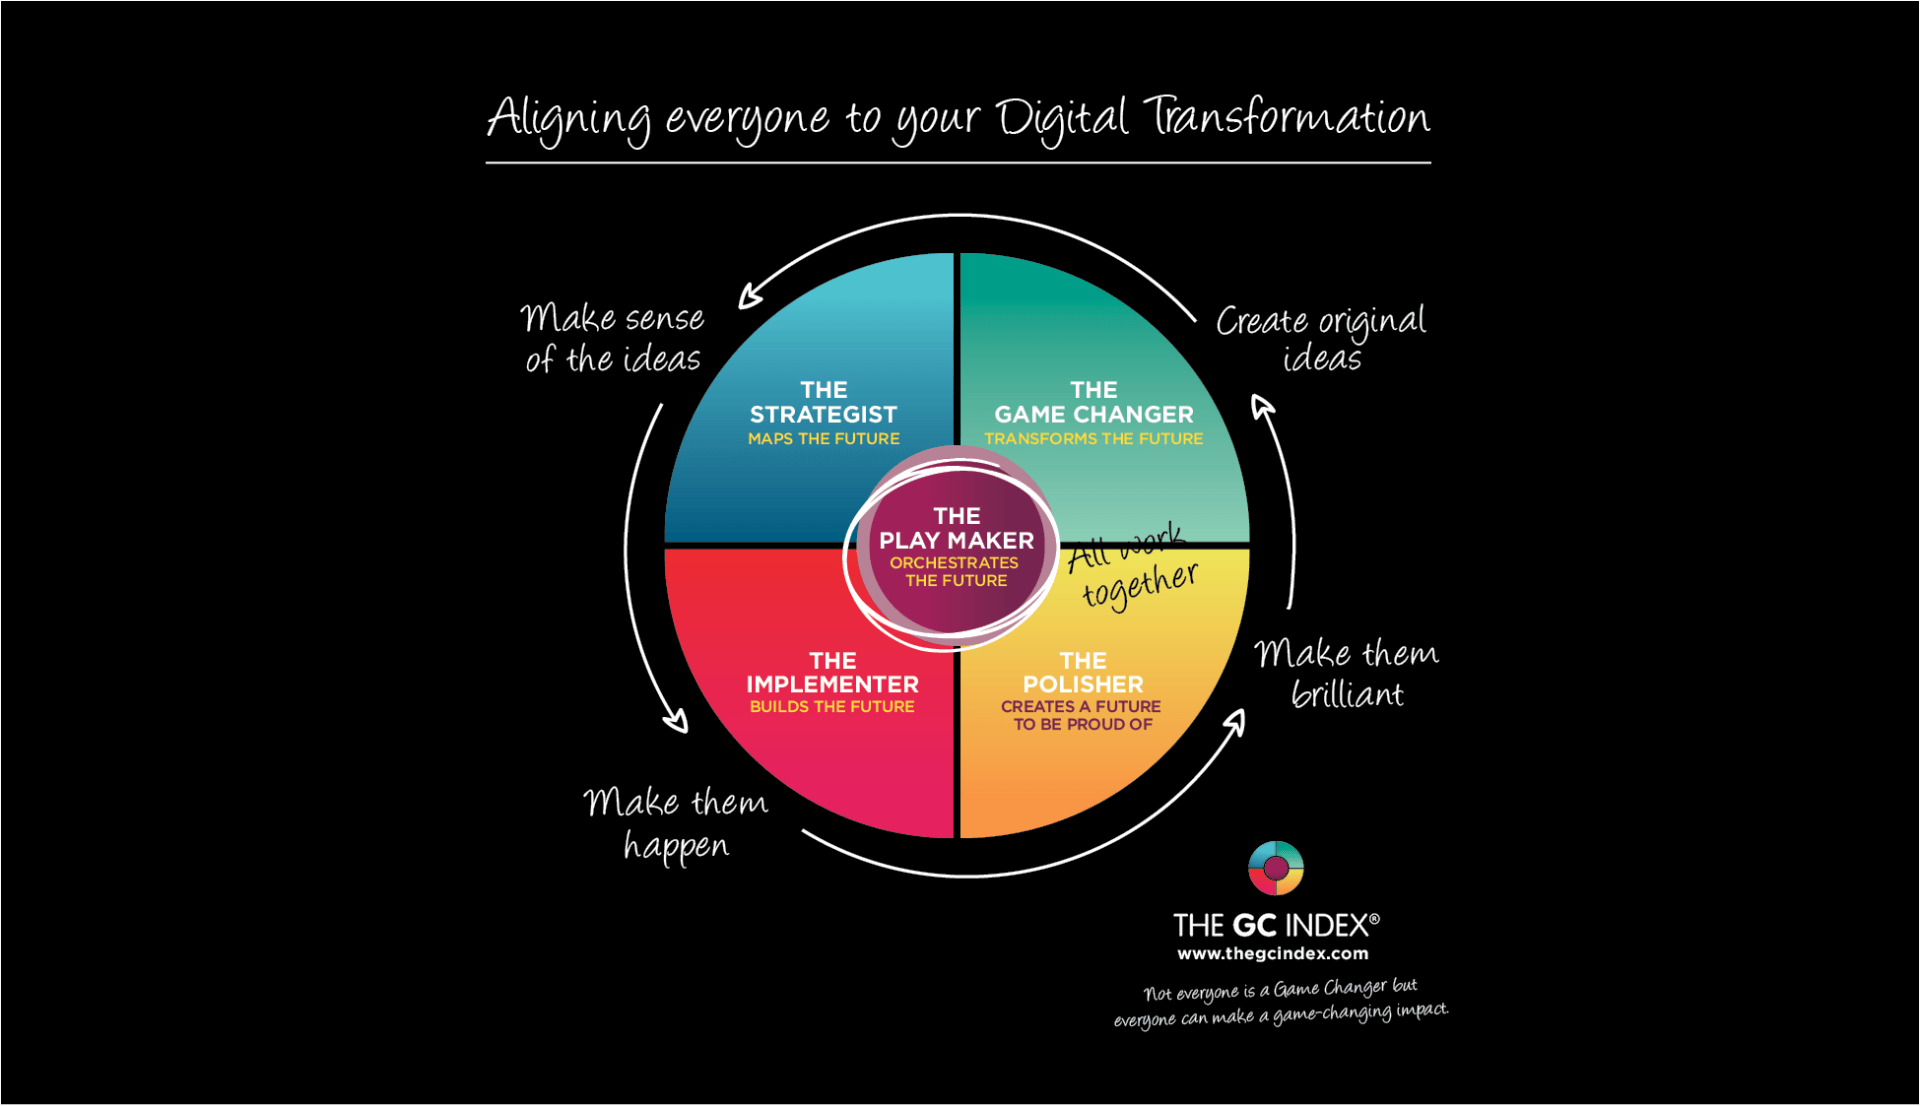 Aligning everyone to your Digital Transformation